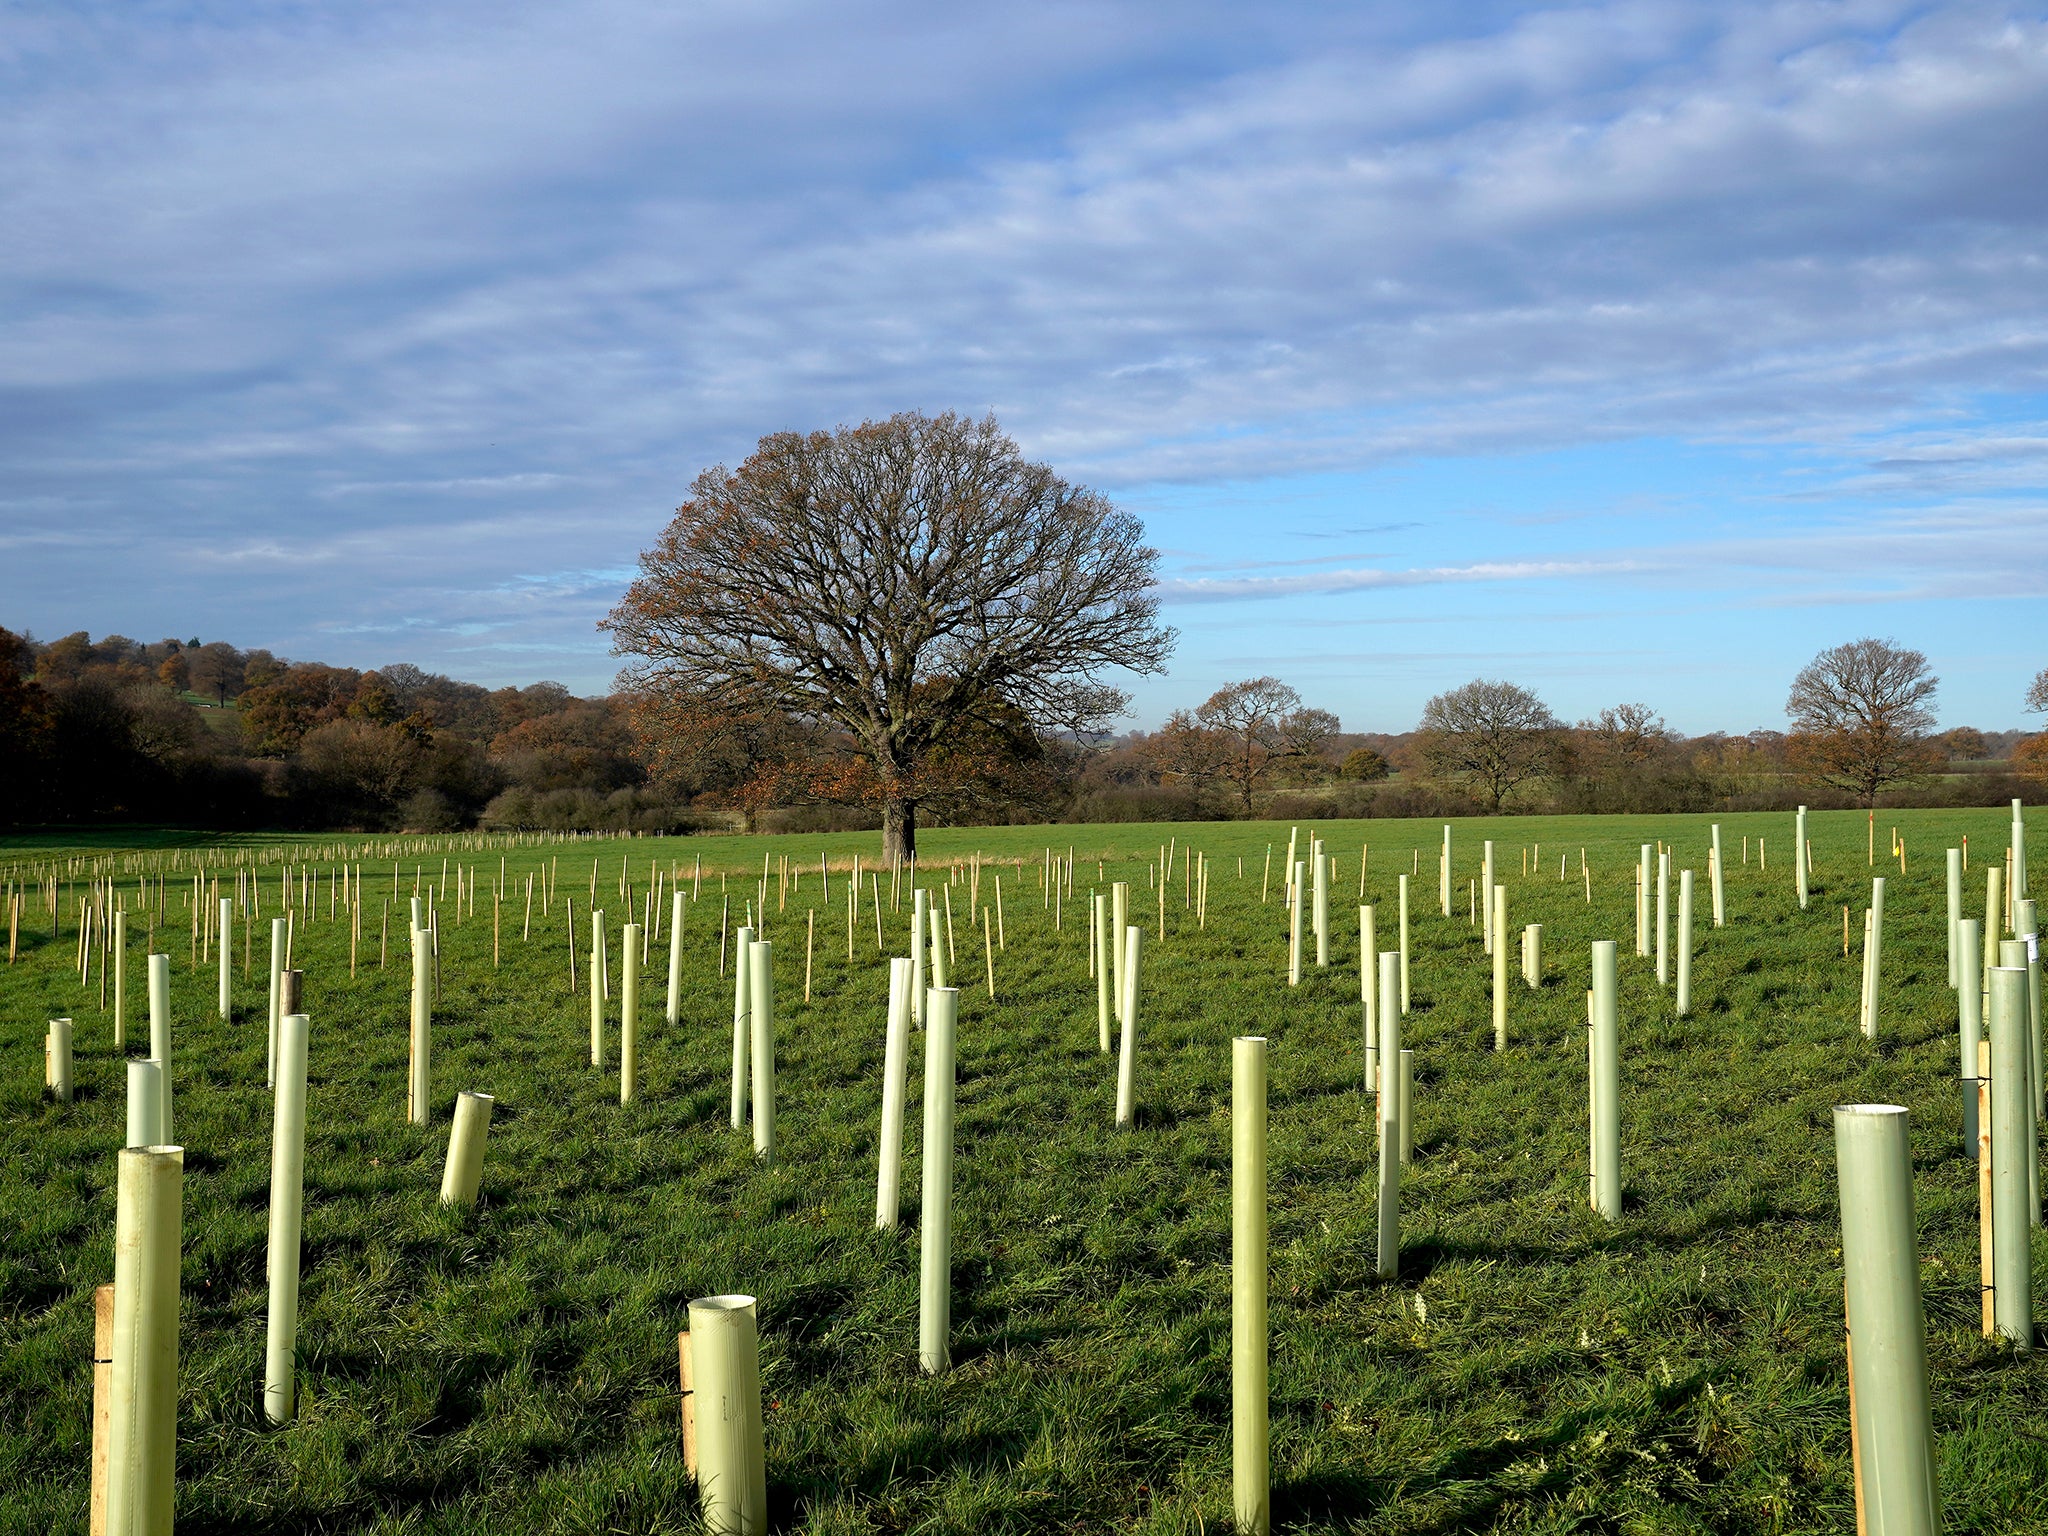 Planting trees is seen as an easy way to offset carbon footprints, but will it do any good?